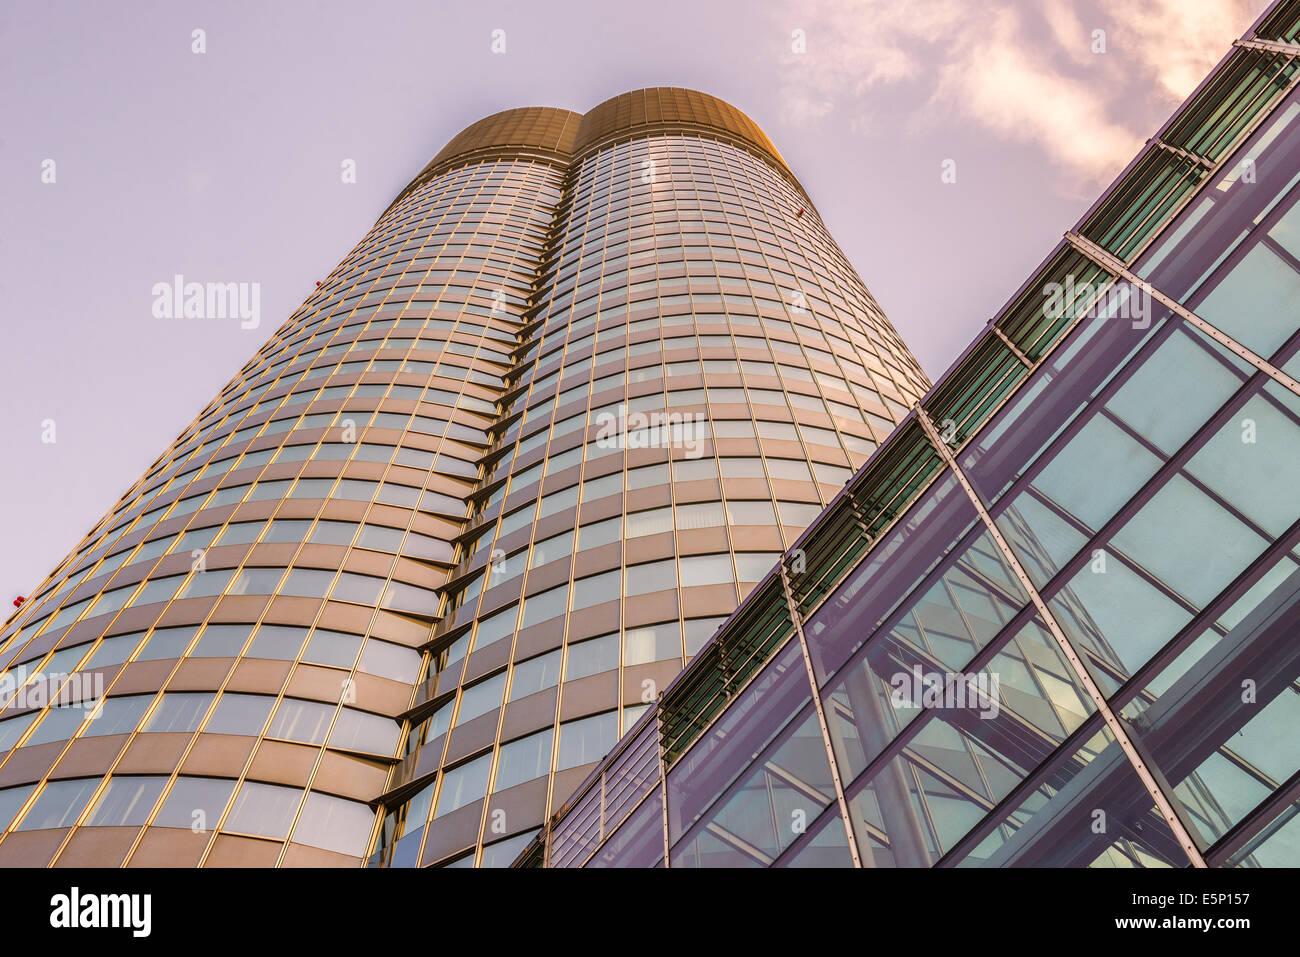 Millennium Tower, Vienna, Austria. It is the second tallest building in Austria at 171 metres (561 feet). Stock Photo